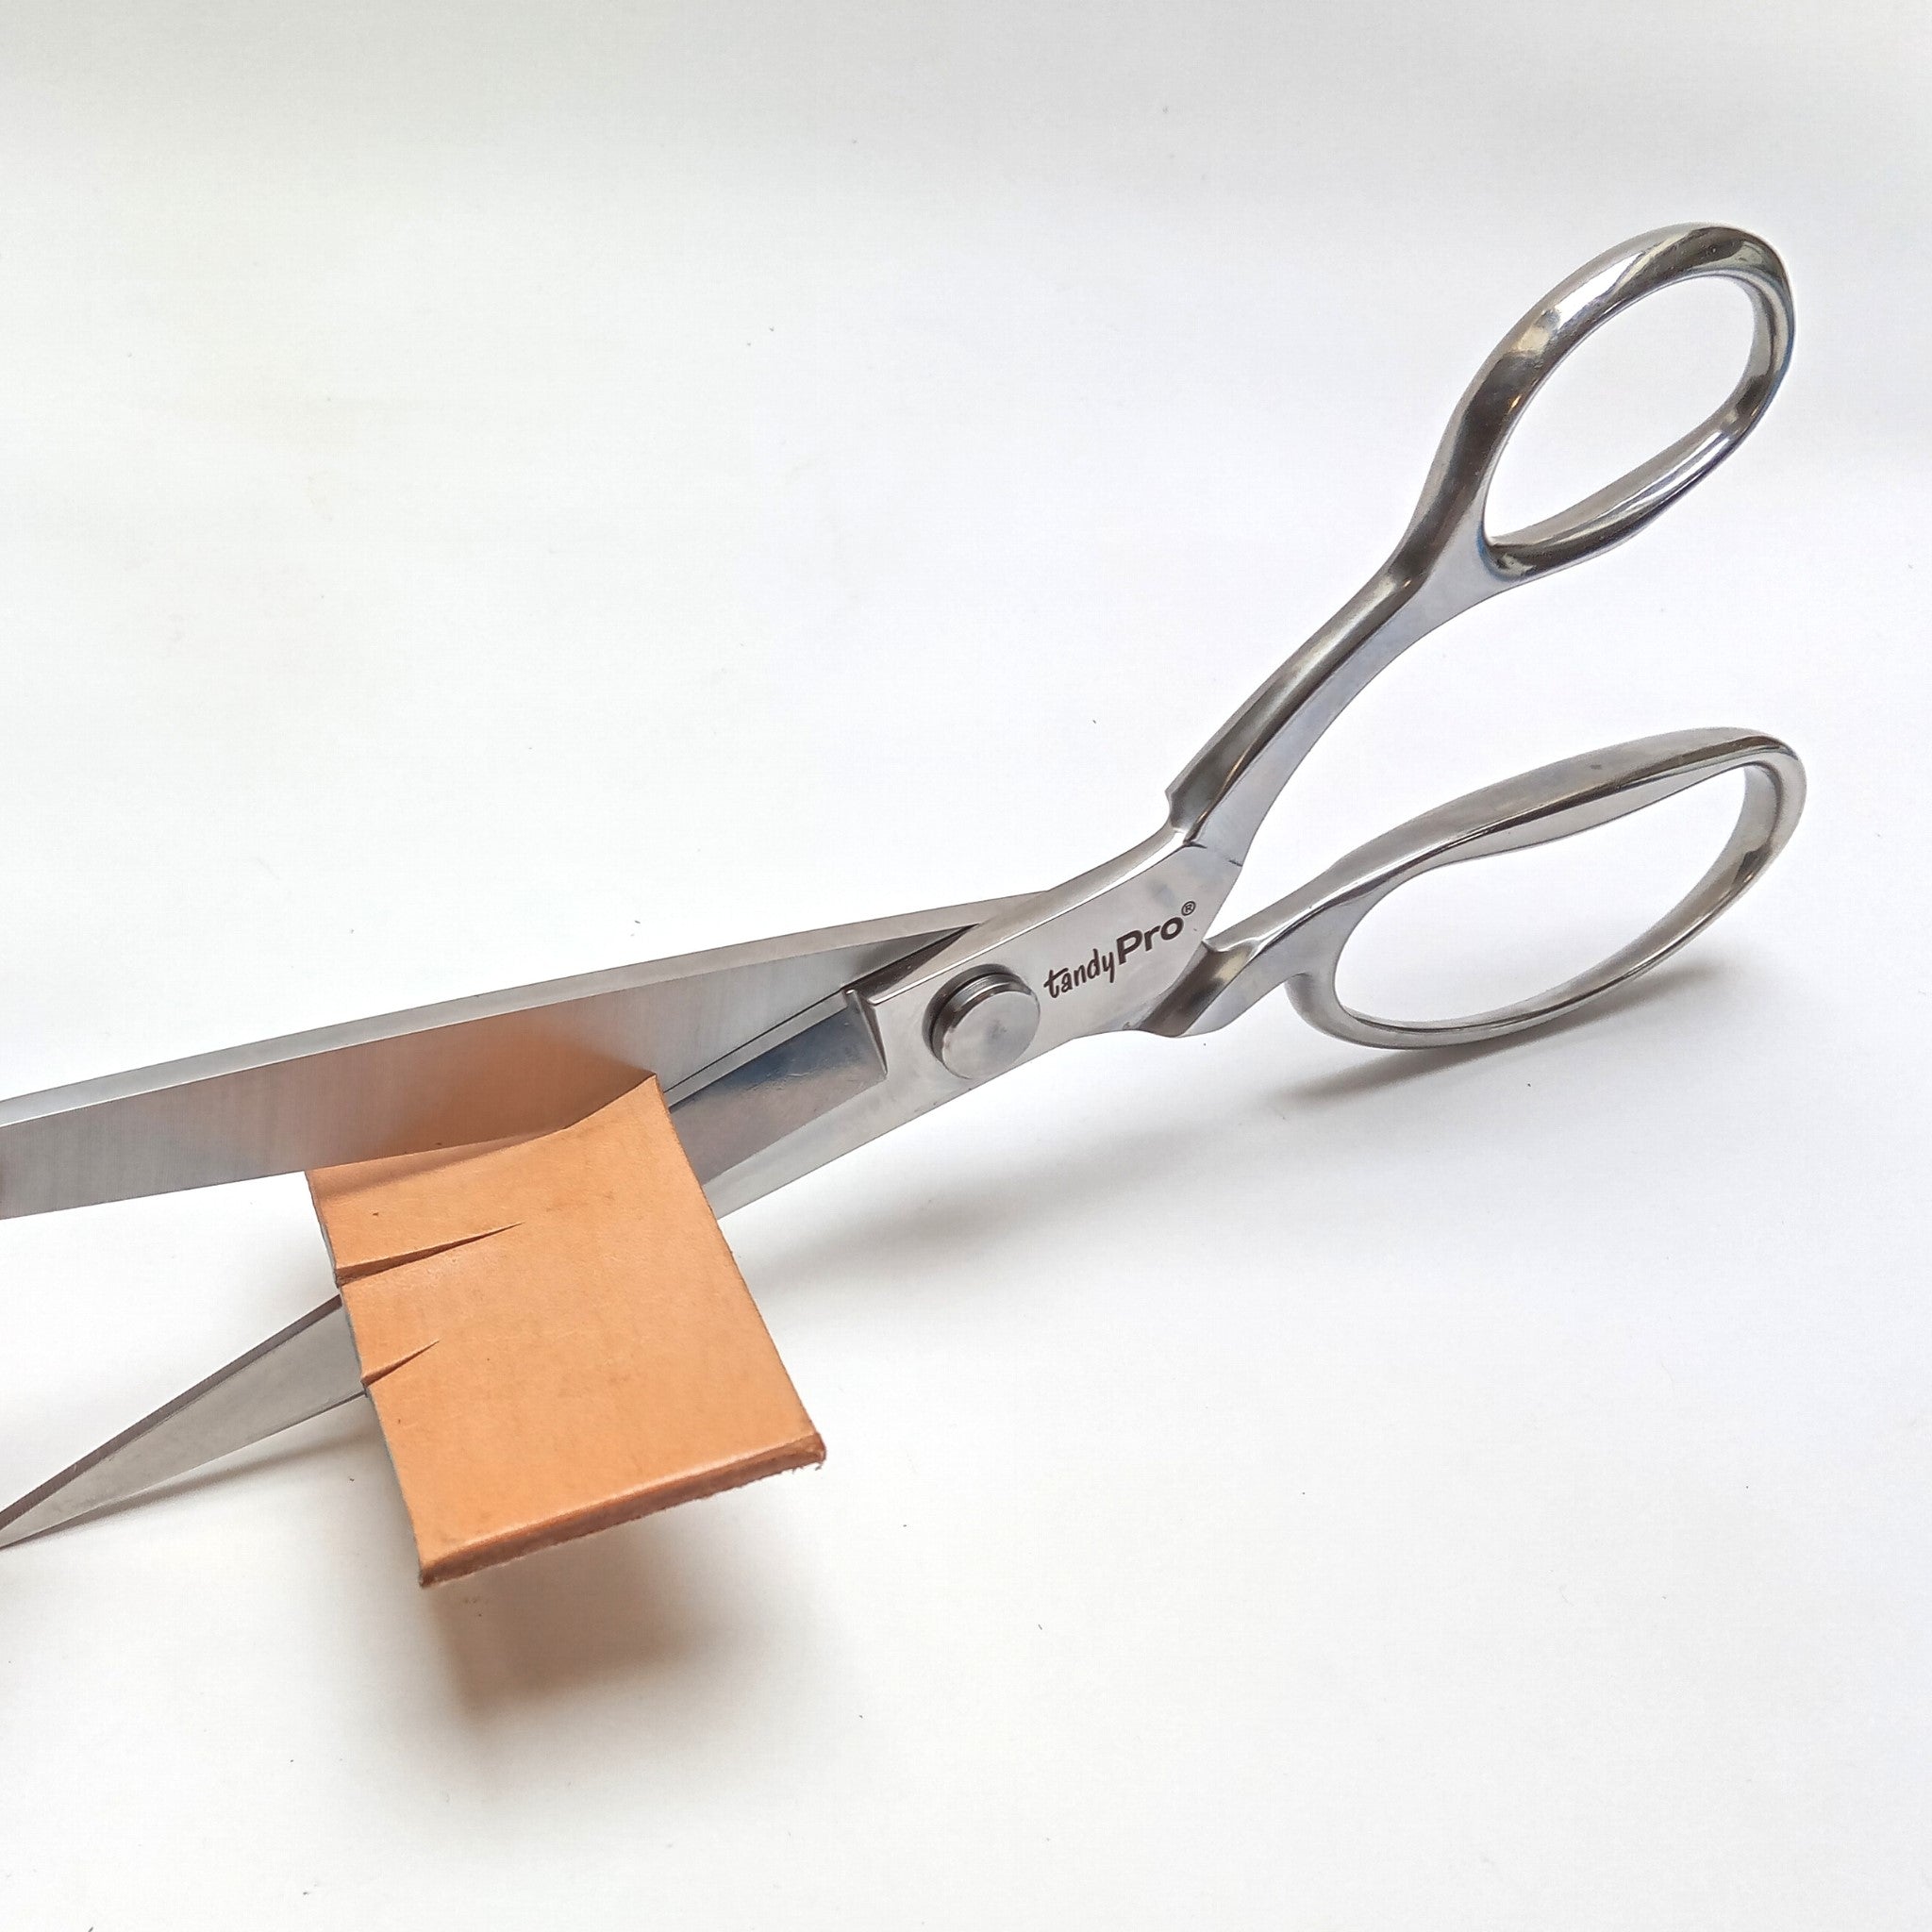 Professional high quality shears, ideal for cutting vegetable tanned leather, and all other leather types. 